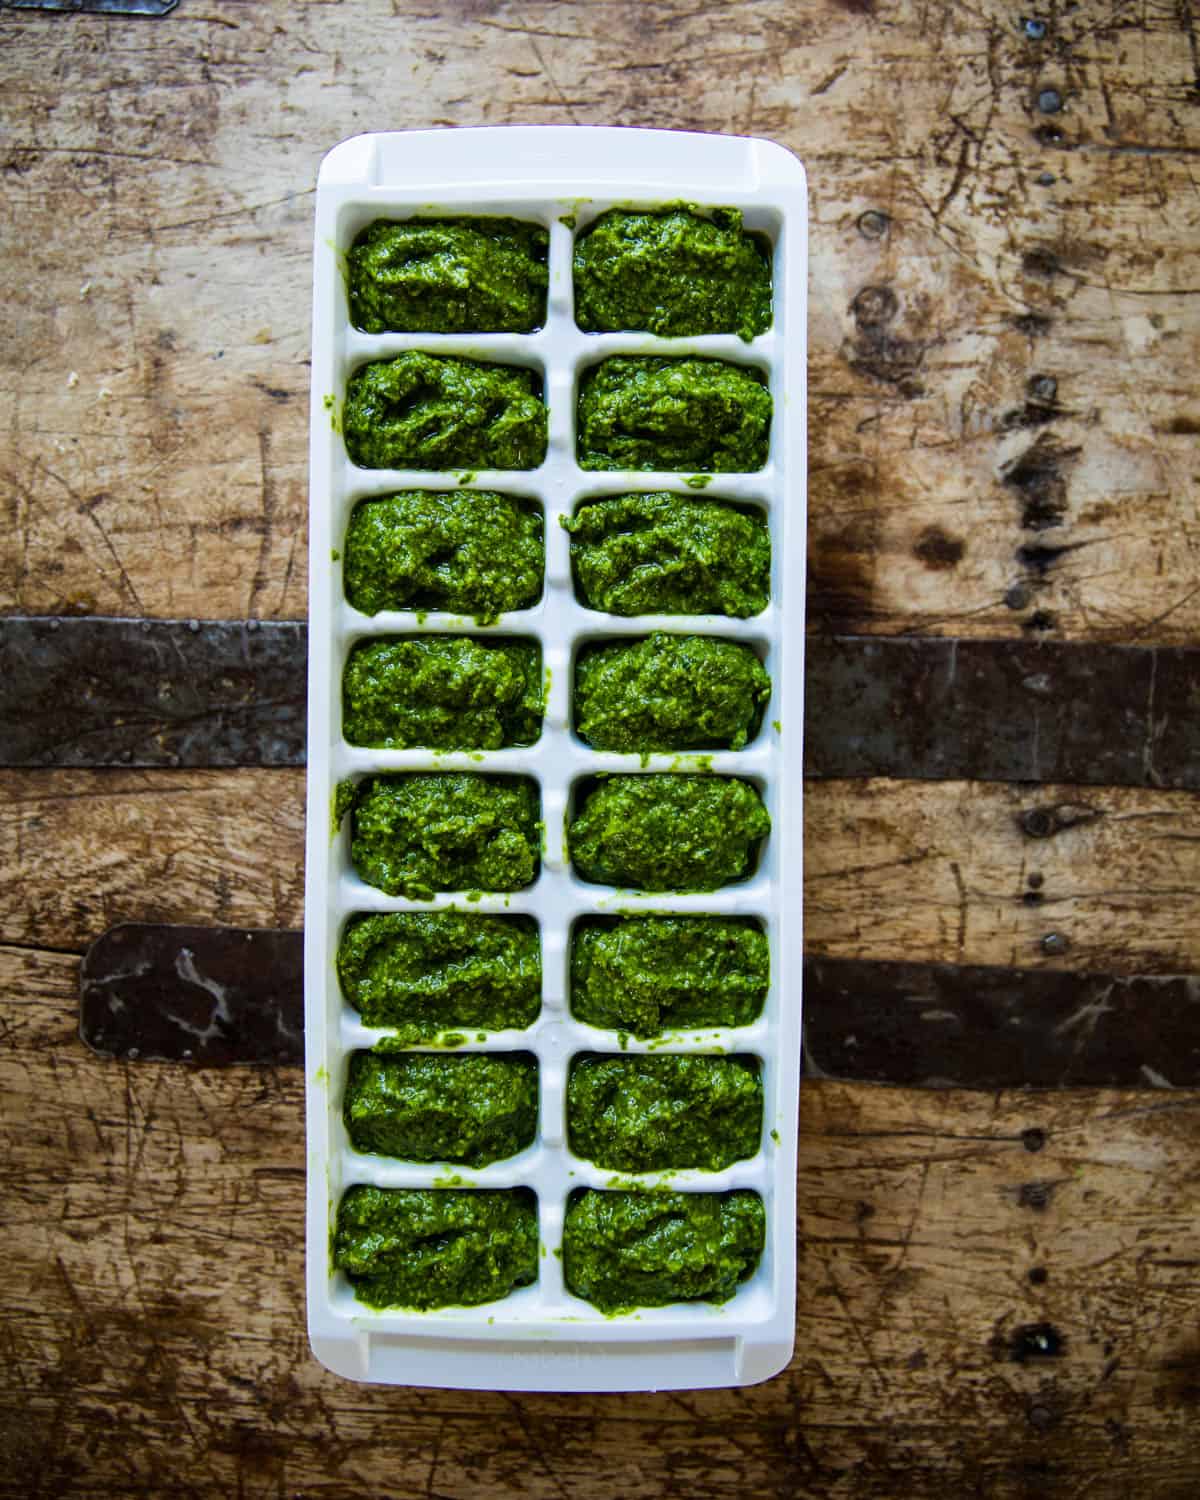 ramp pesto in an ice cube tray to freeze